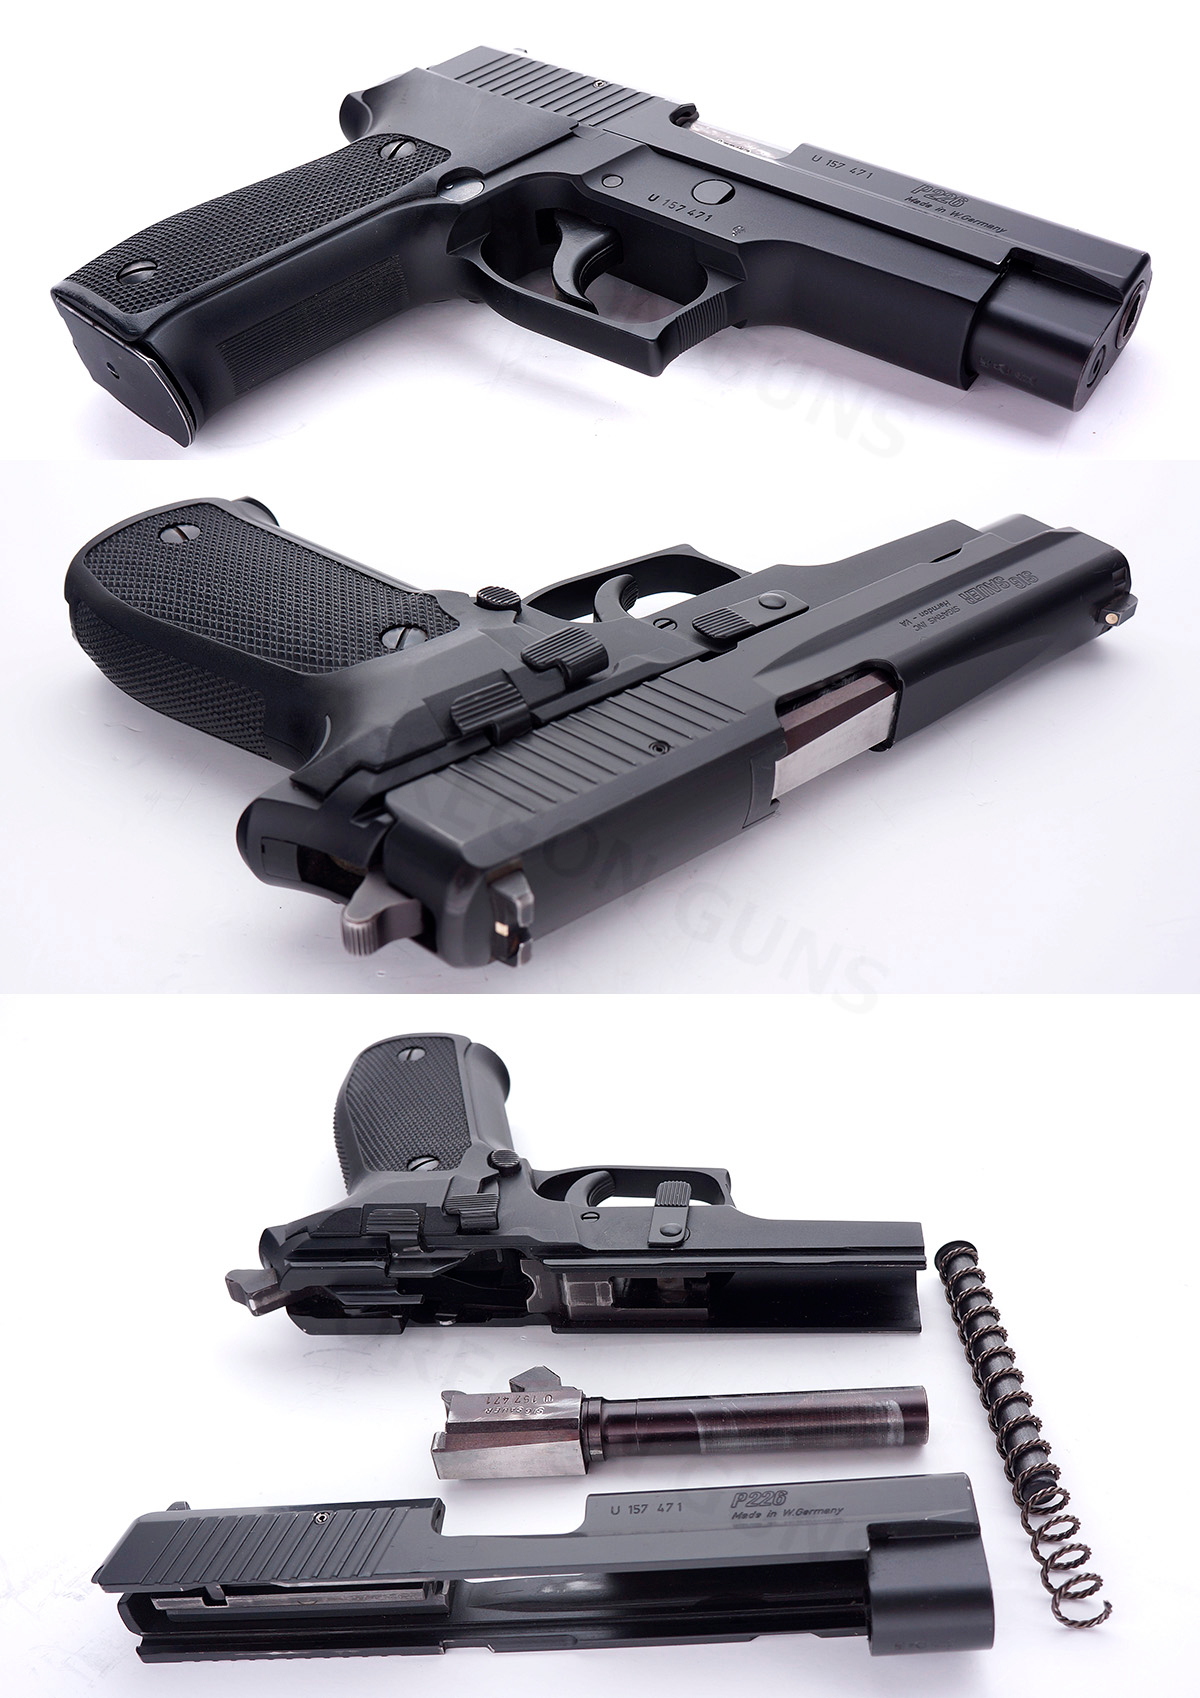 SIG SAUER INC - SIGARMS P226 9MM SEMIAUTO PISTOL W/8 EXTRA FACTORY HI-CAP MAGS SN# U157471 - Picture 3